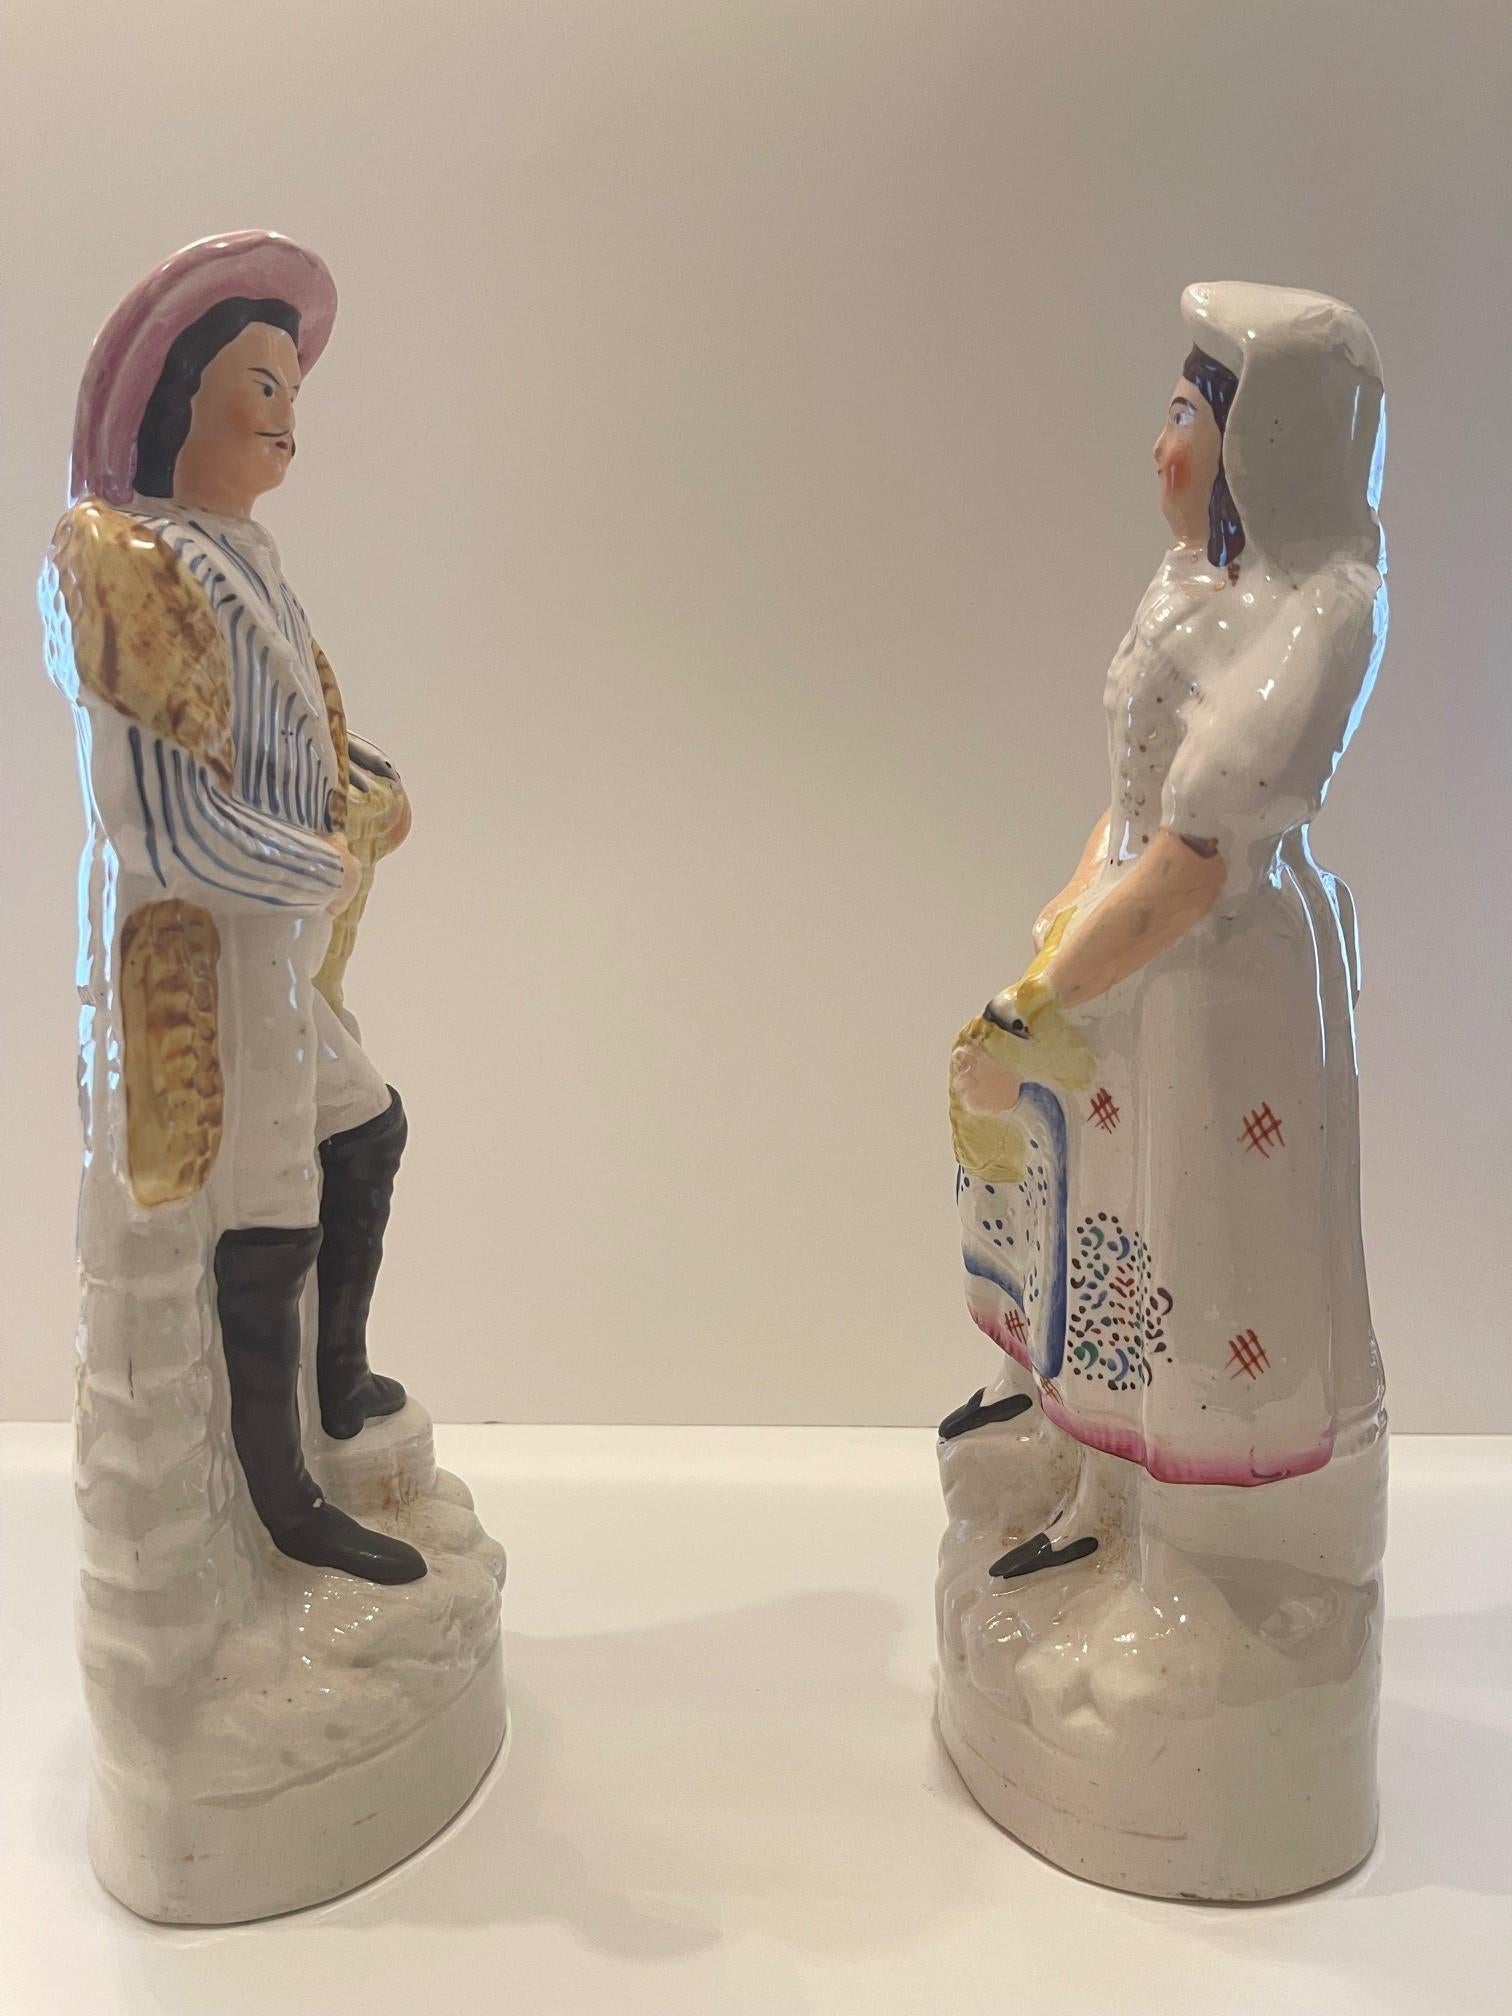 A pair of Staffordshire Figures of a woman and a man holding a catch of fish. The brown-haired lady is dressed in a peasant blouse, skirt, and apron. She is wearing a white hat and black shoes. The white tie on the hat flows into her collared white